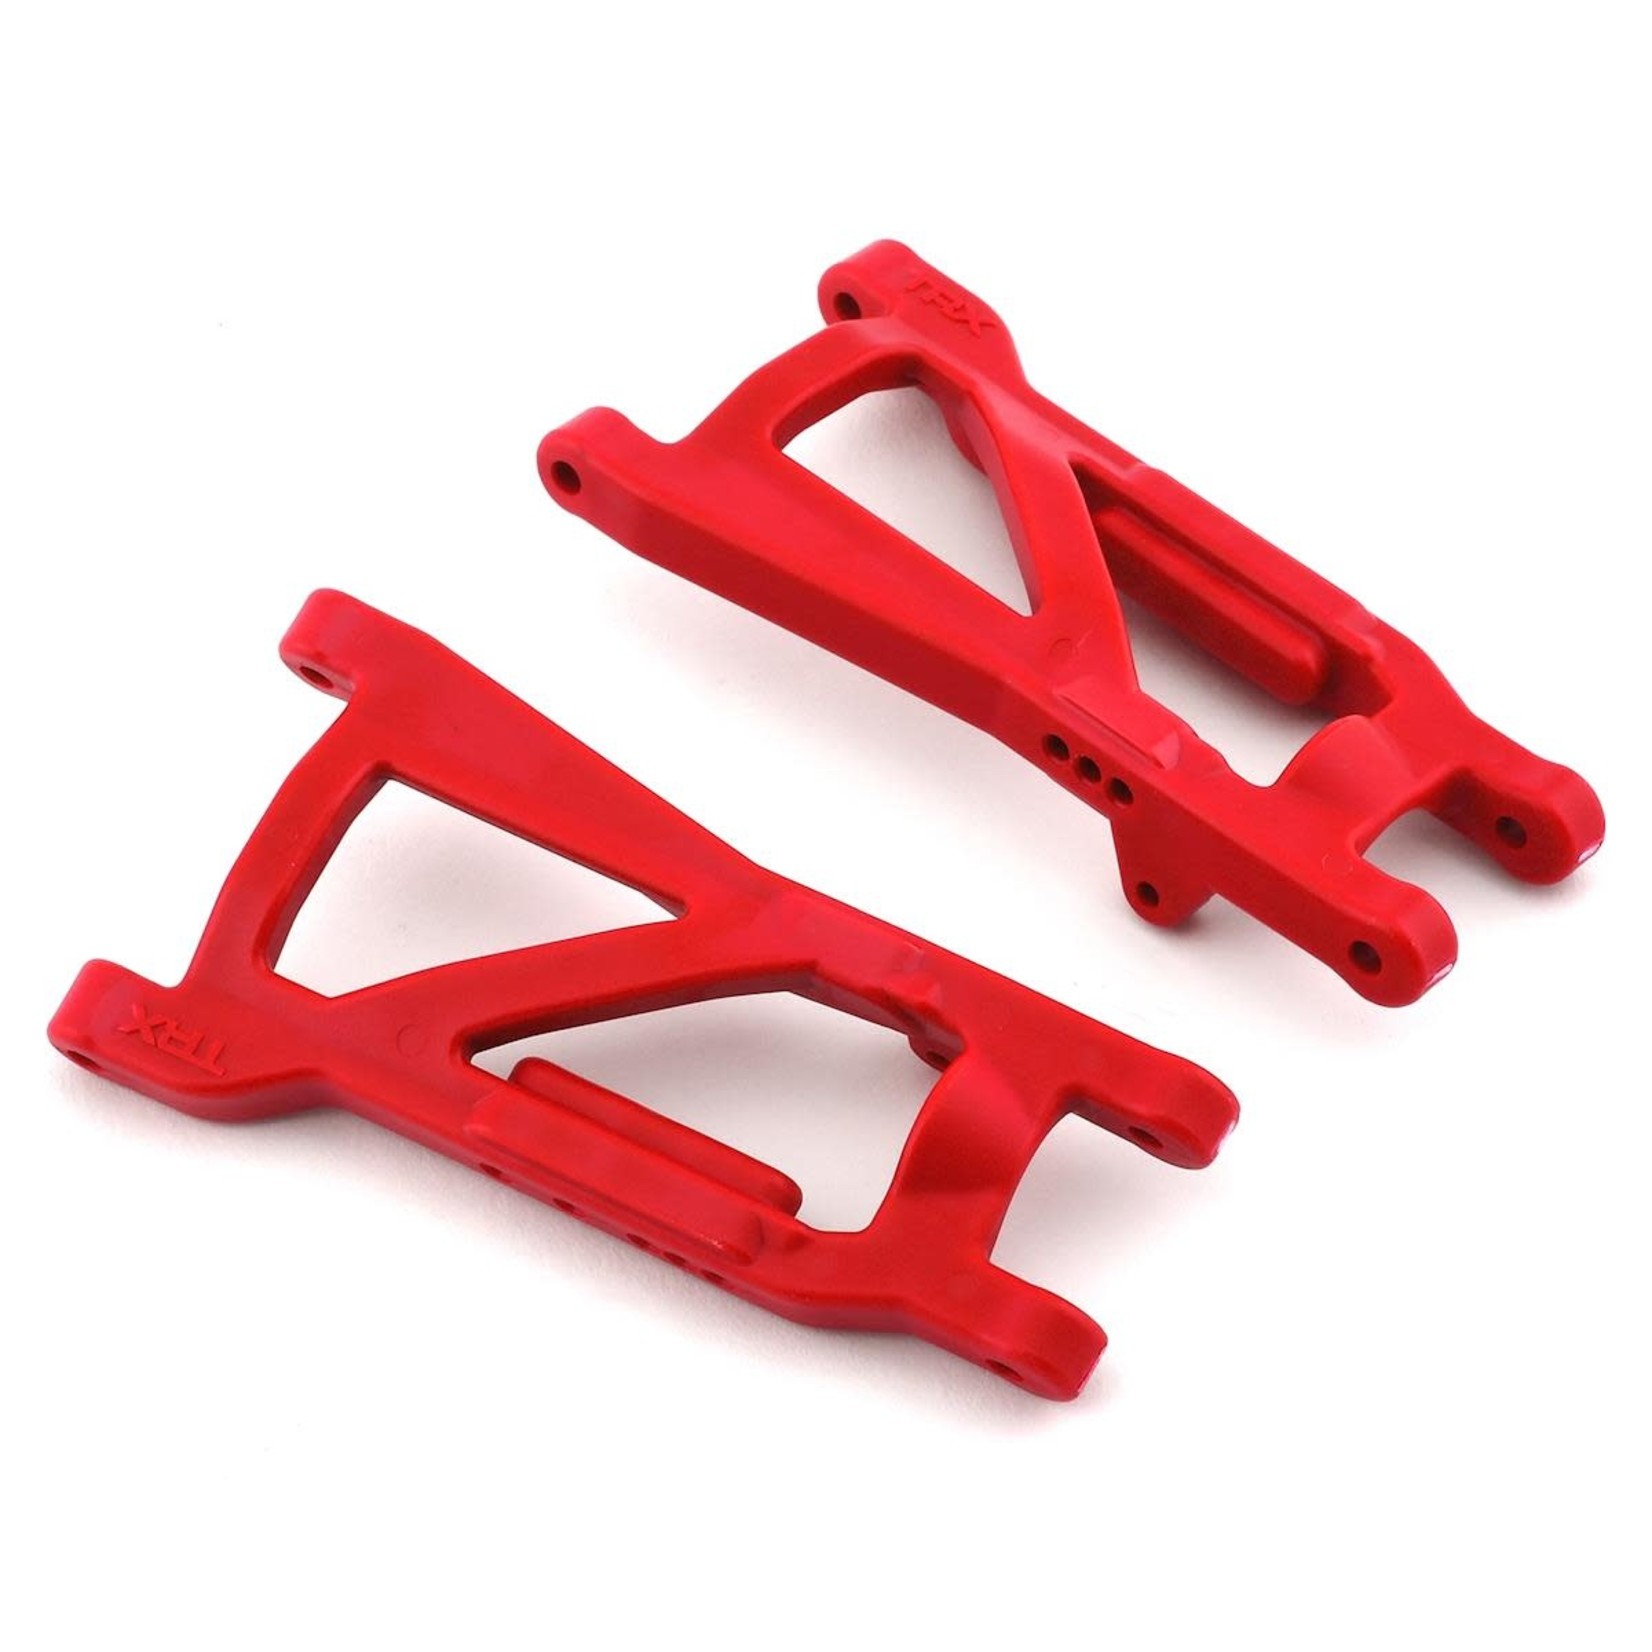 Traxxas Traxxas HD Cold Weather Rear Suspension Arm Set (Red) (2) #2555R